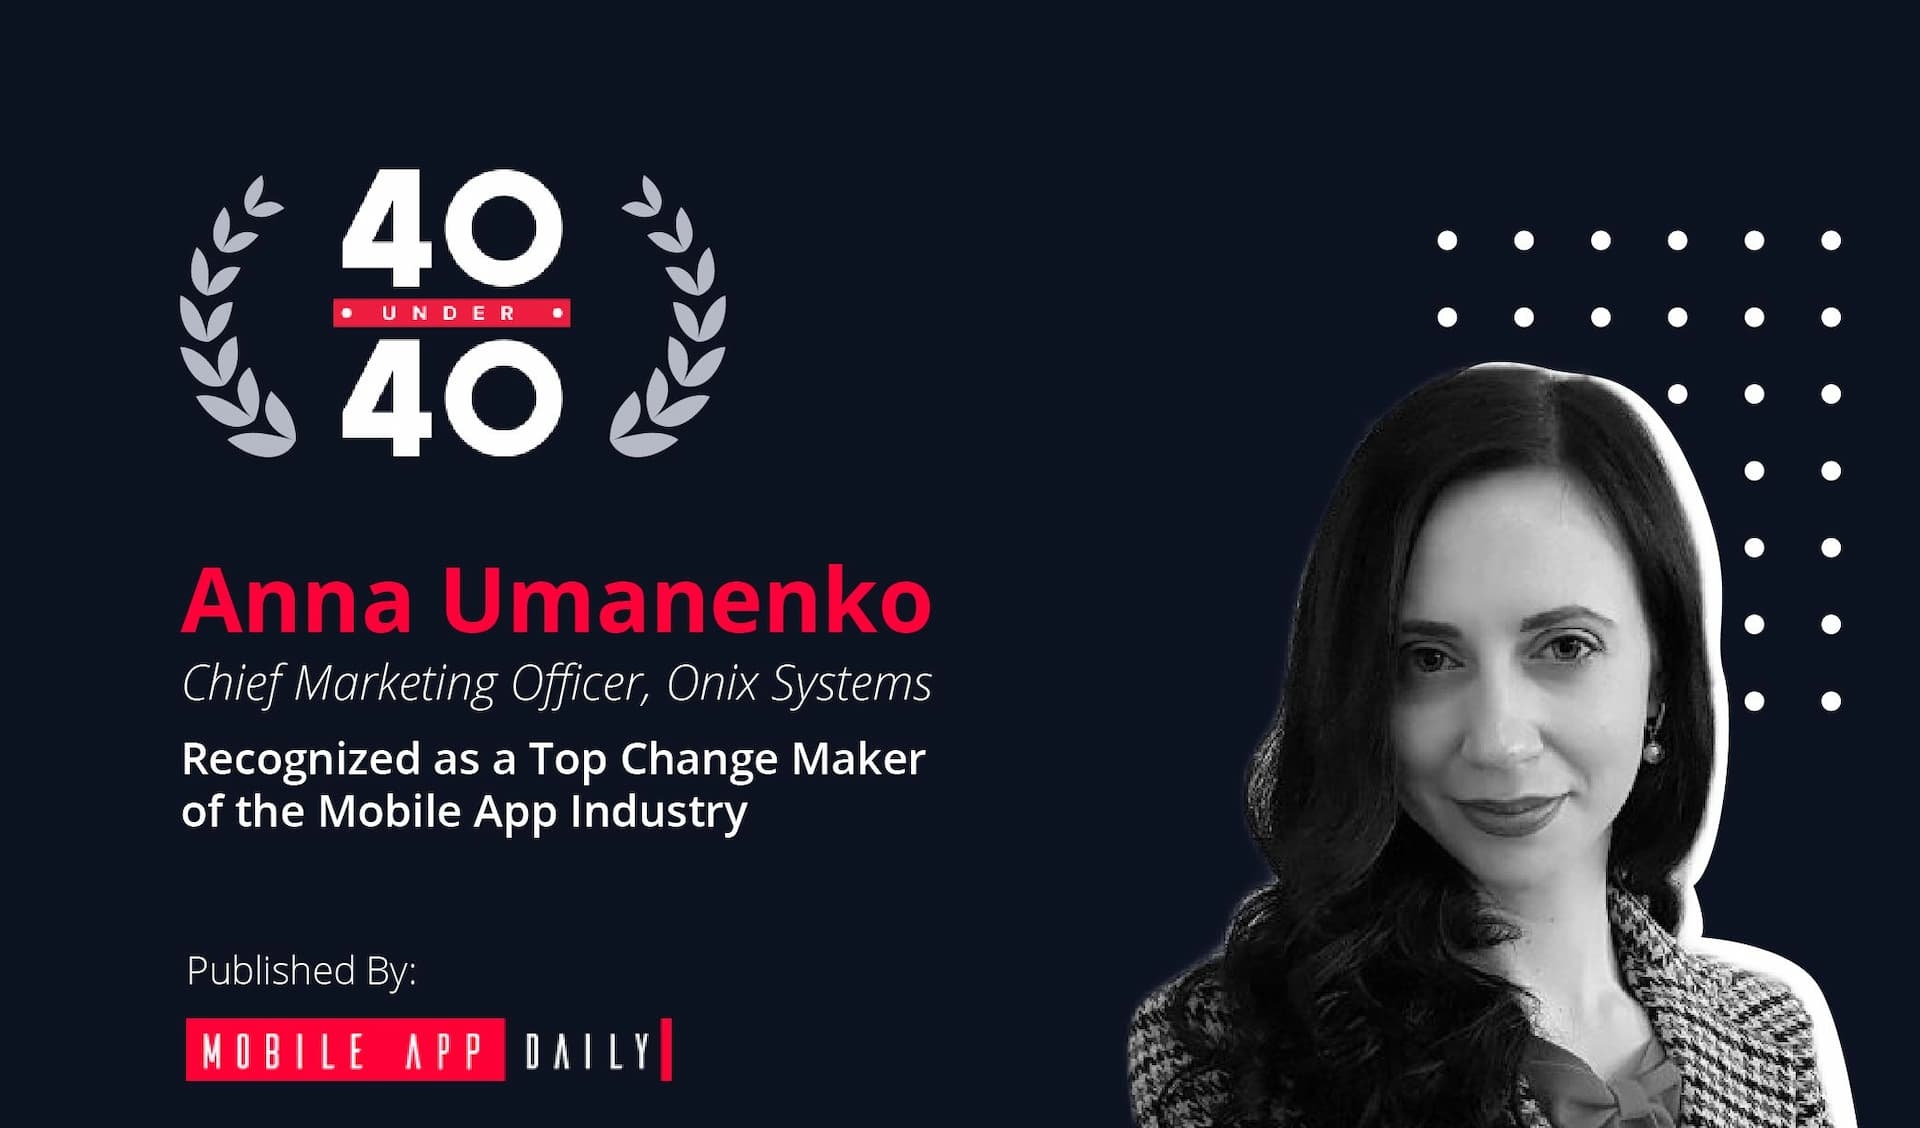 MobileAppDaily featured our CMO in the 40 under 40 technology leaders report